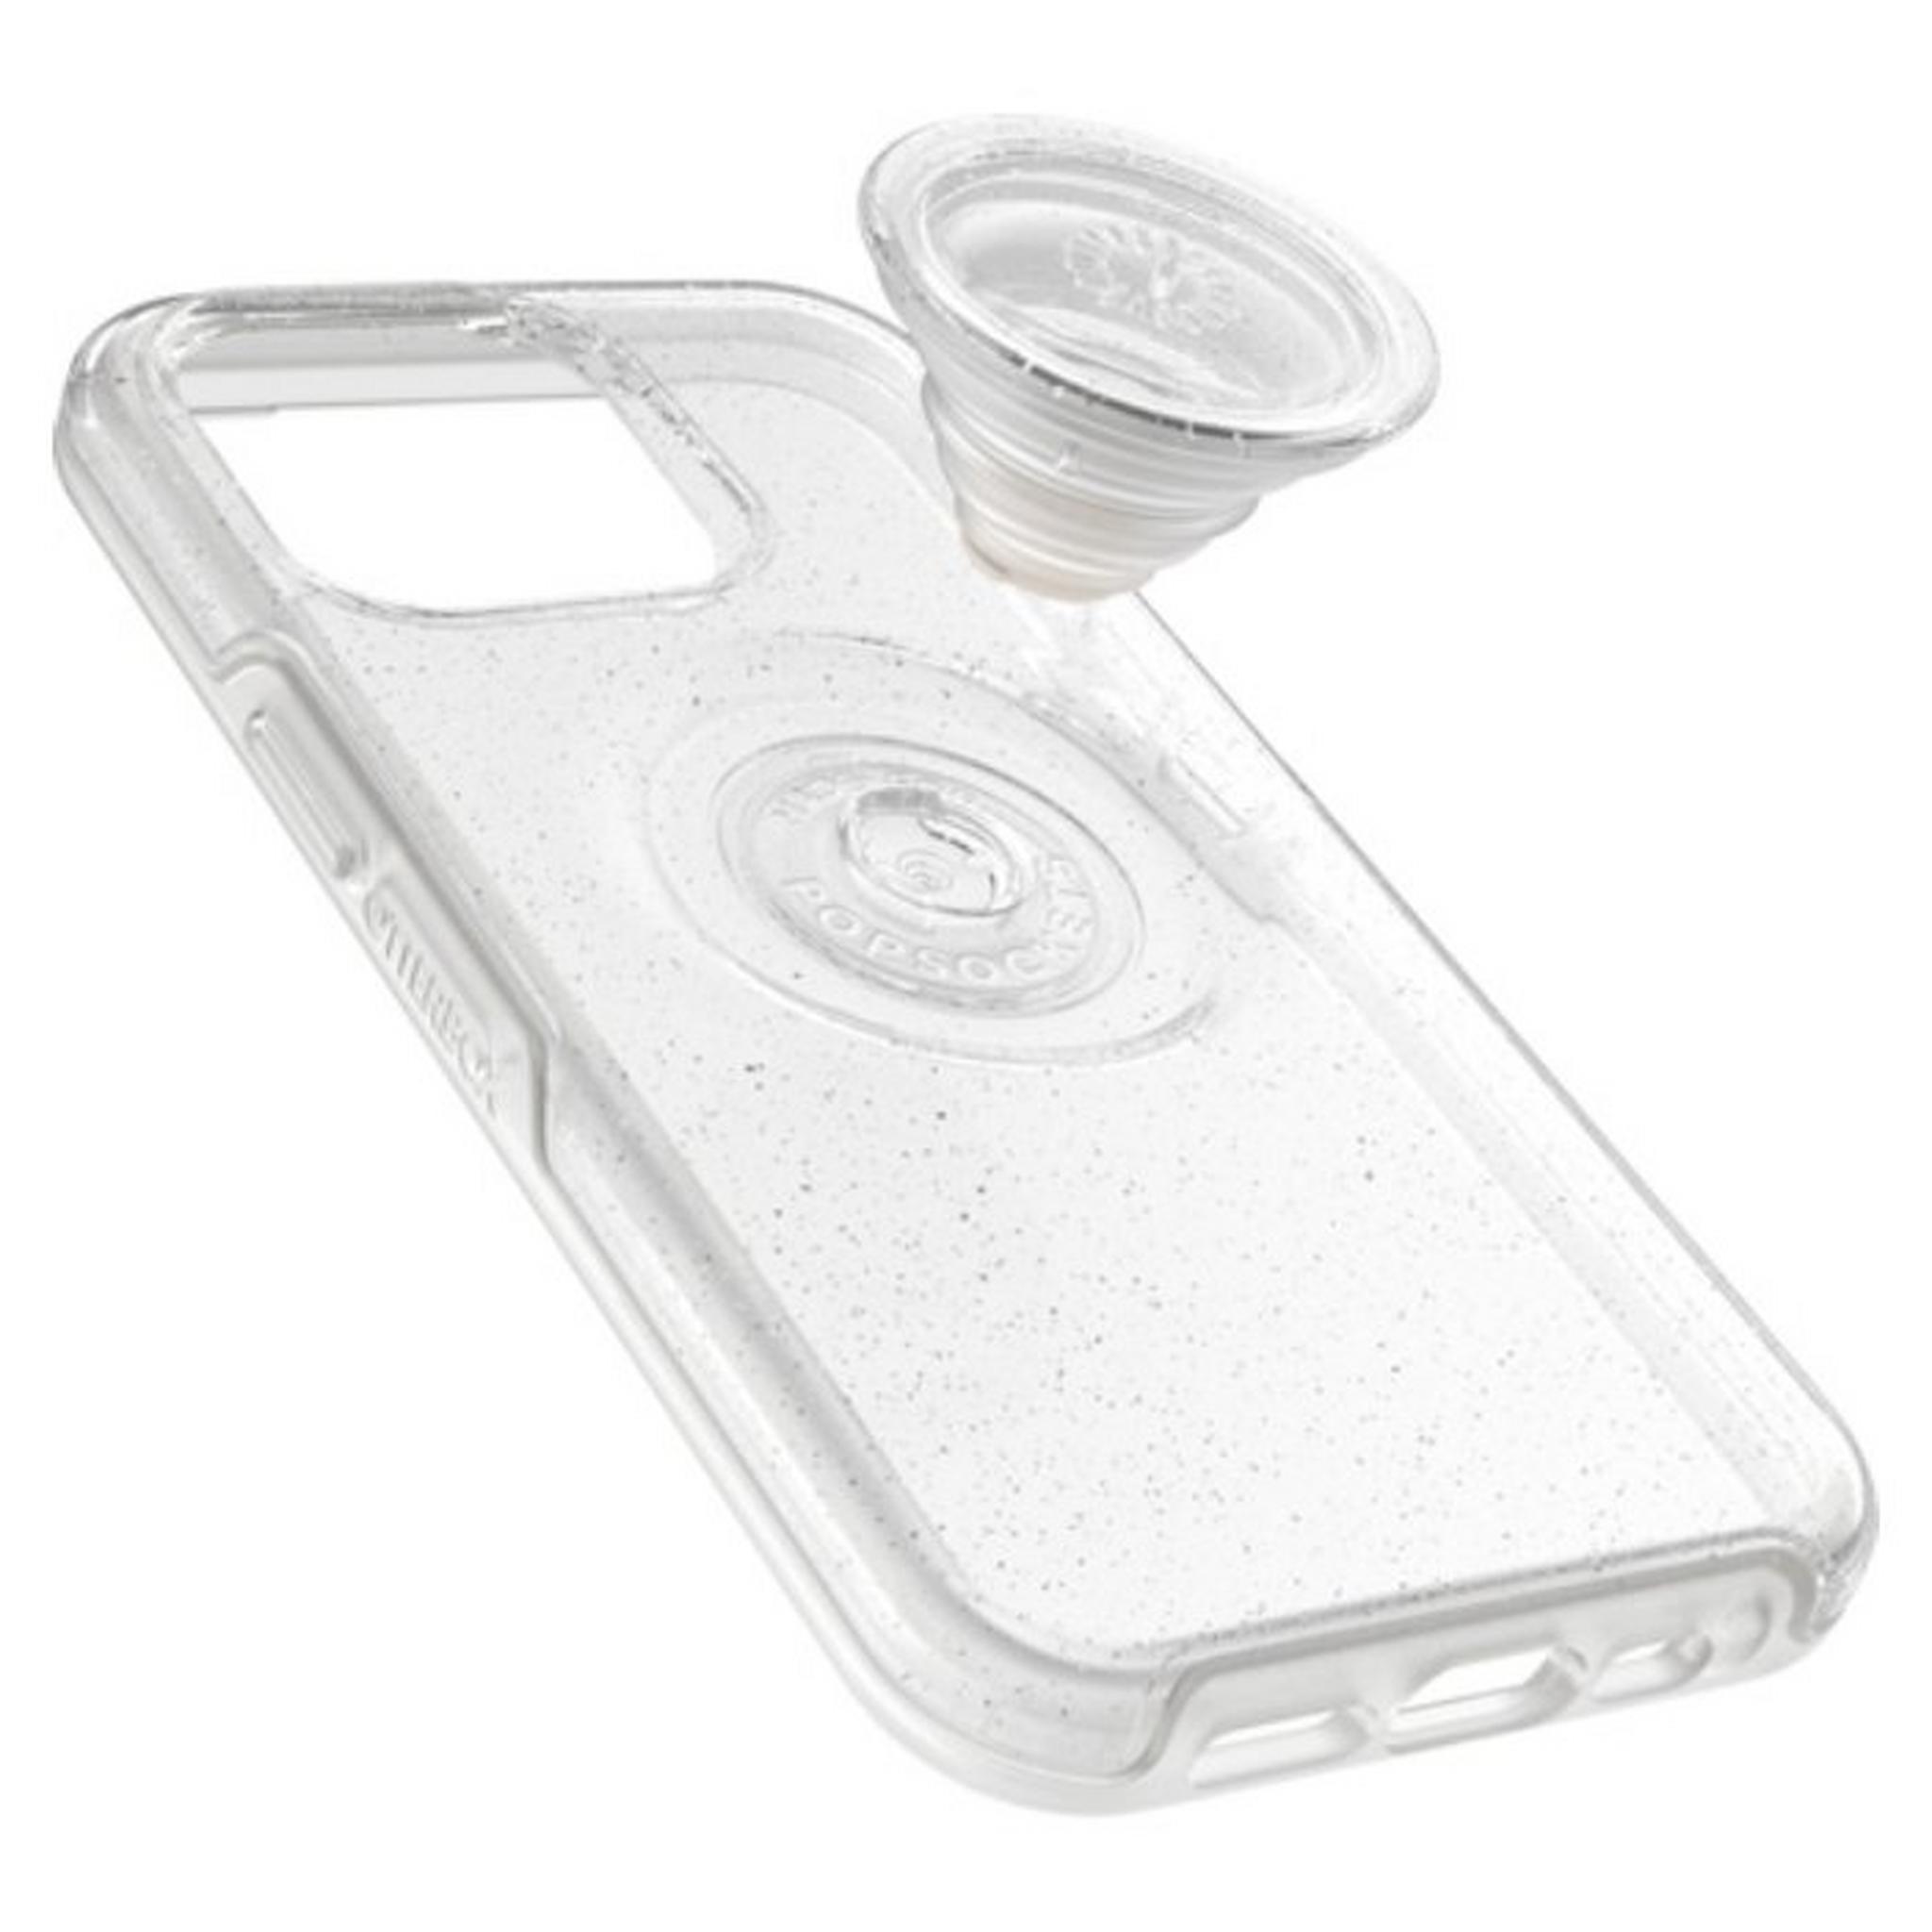 Otterbox Otter Pop Symmetry Case for iPhone 13 Pro - StarDust